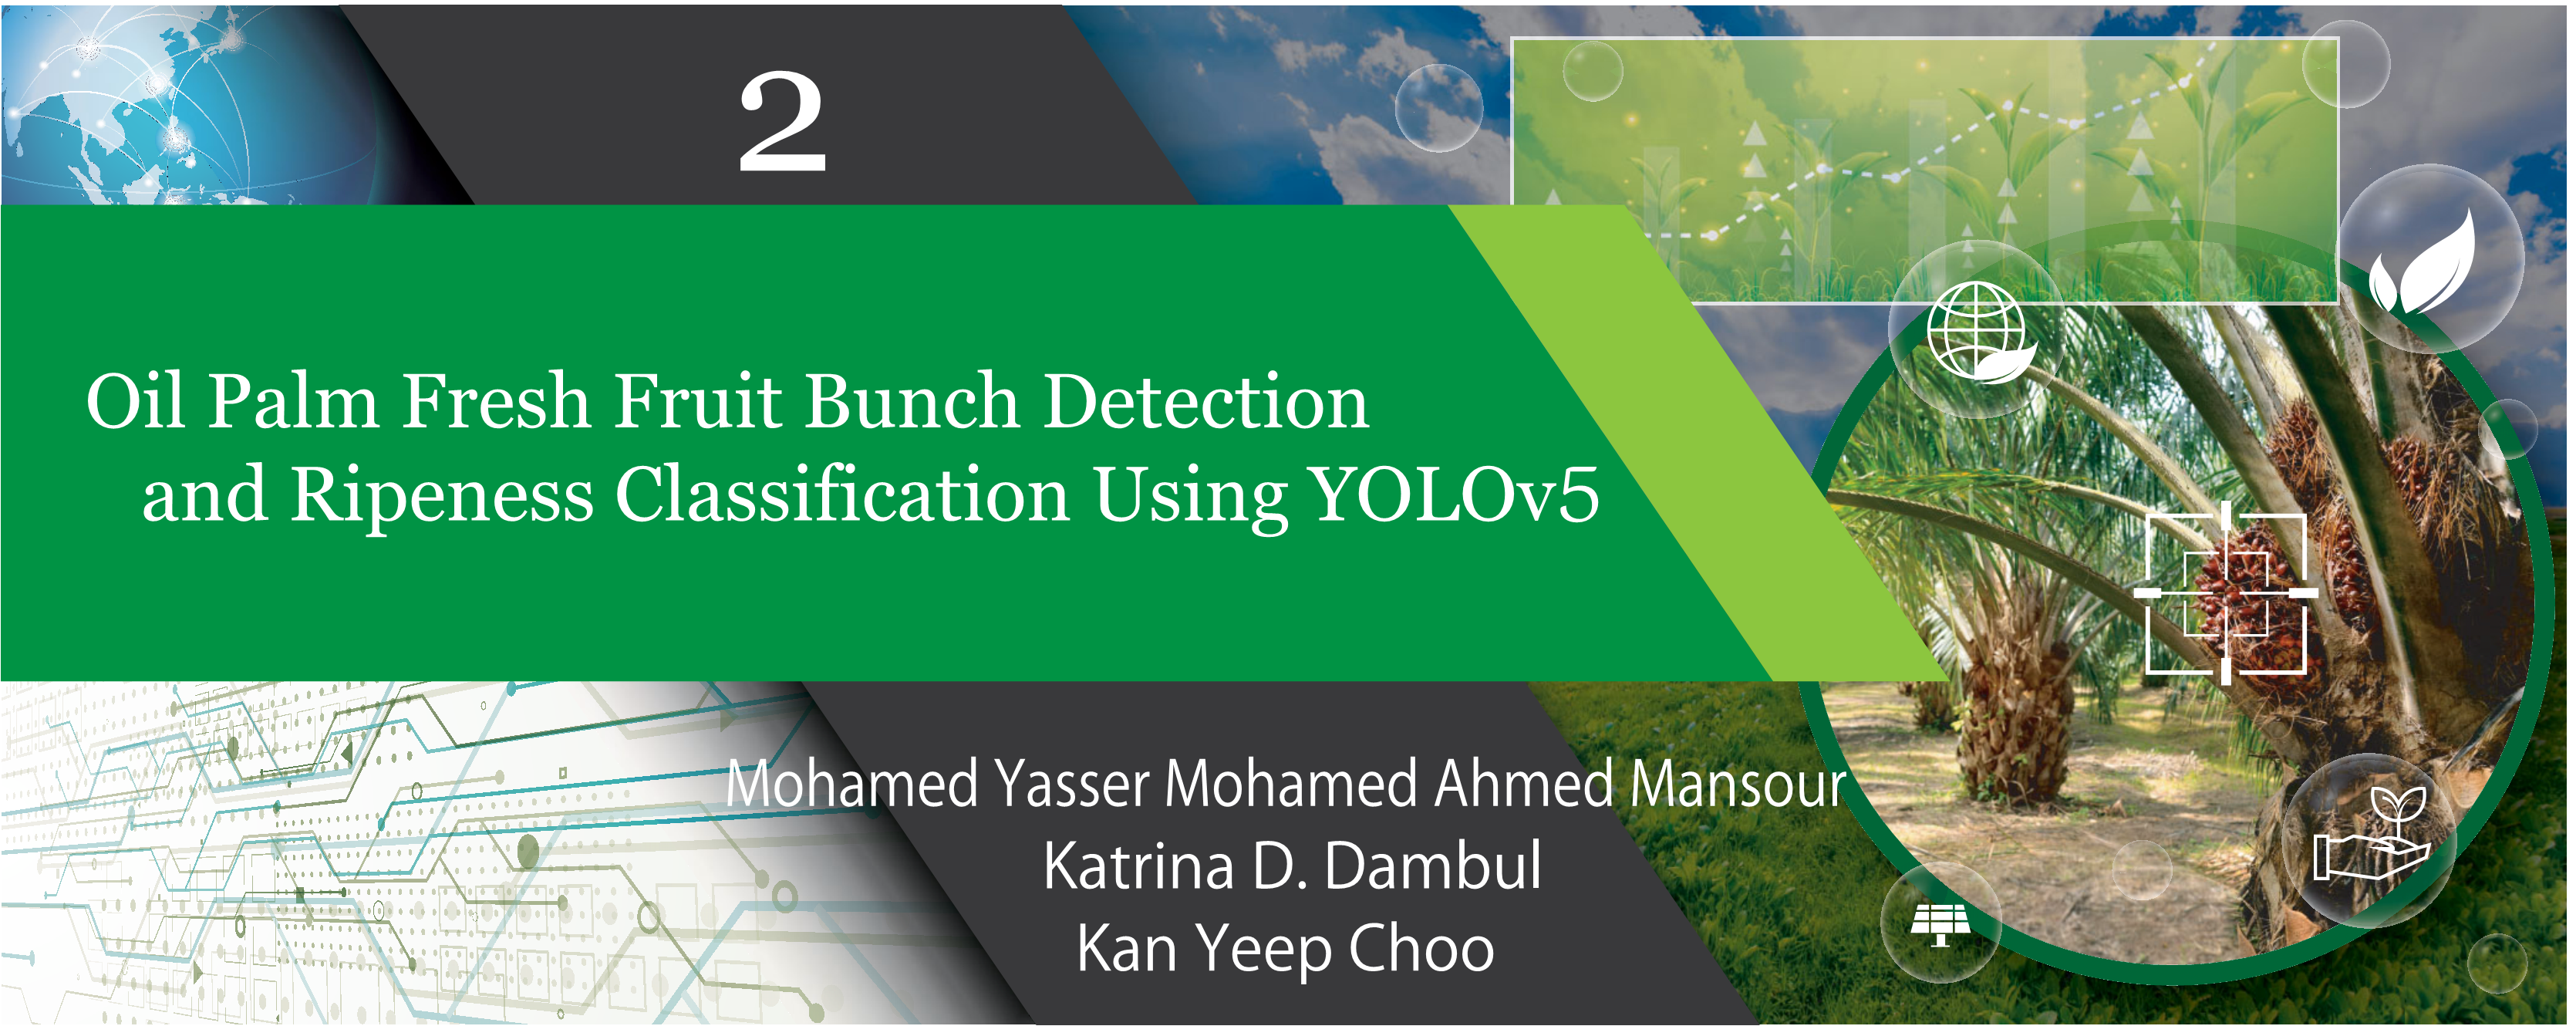 Special Section on 2. Oil Palm Fresh Fruit Bunch Detection and Ripeness Classification Using YOLOv5 Mohamed Yasser Mohamed Ahmed Mansour Katrina D. Dambul Kan Yeep Choo